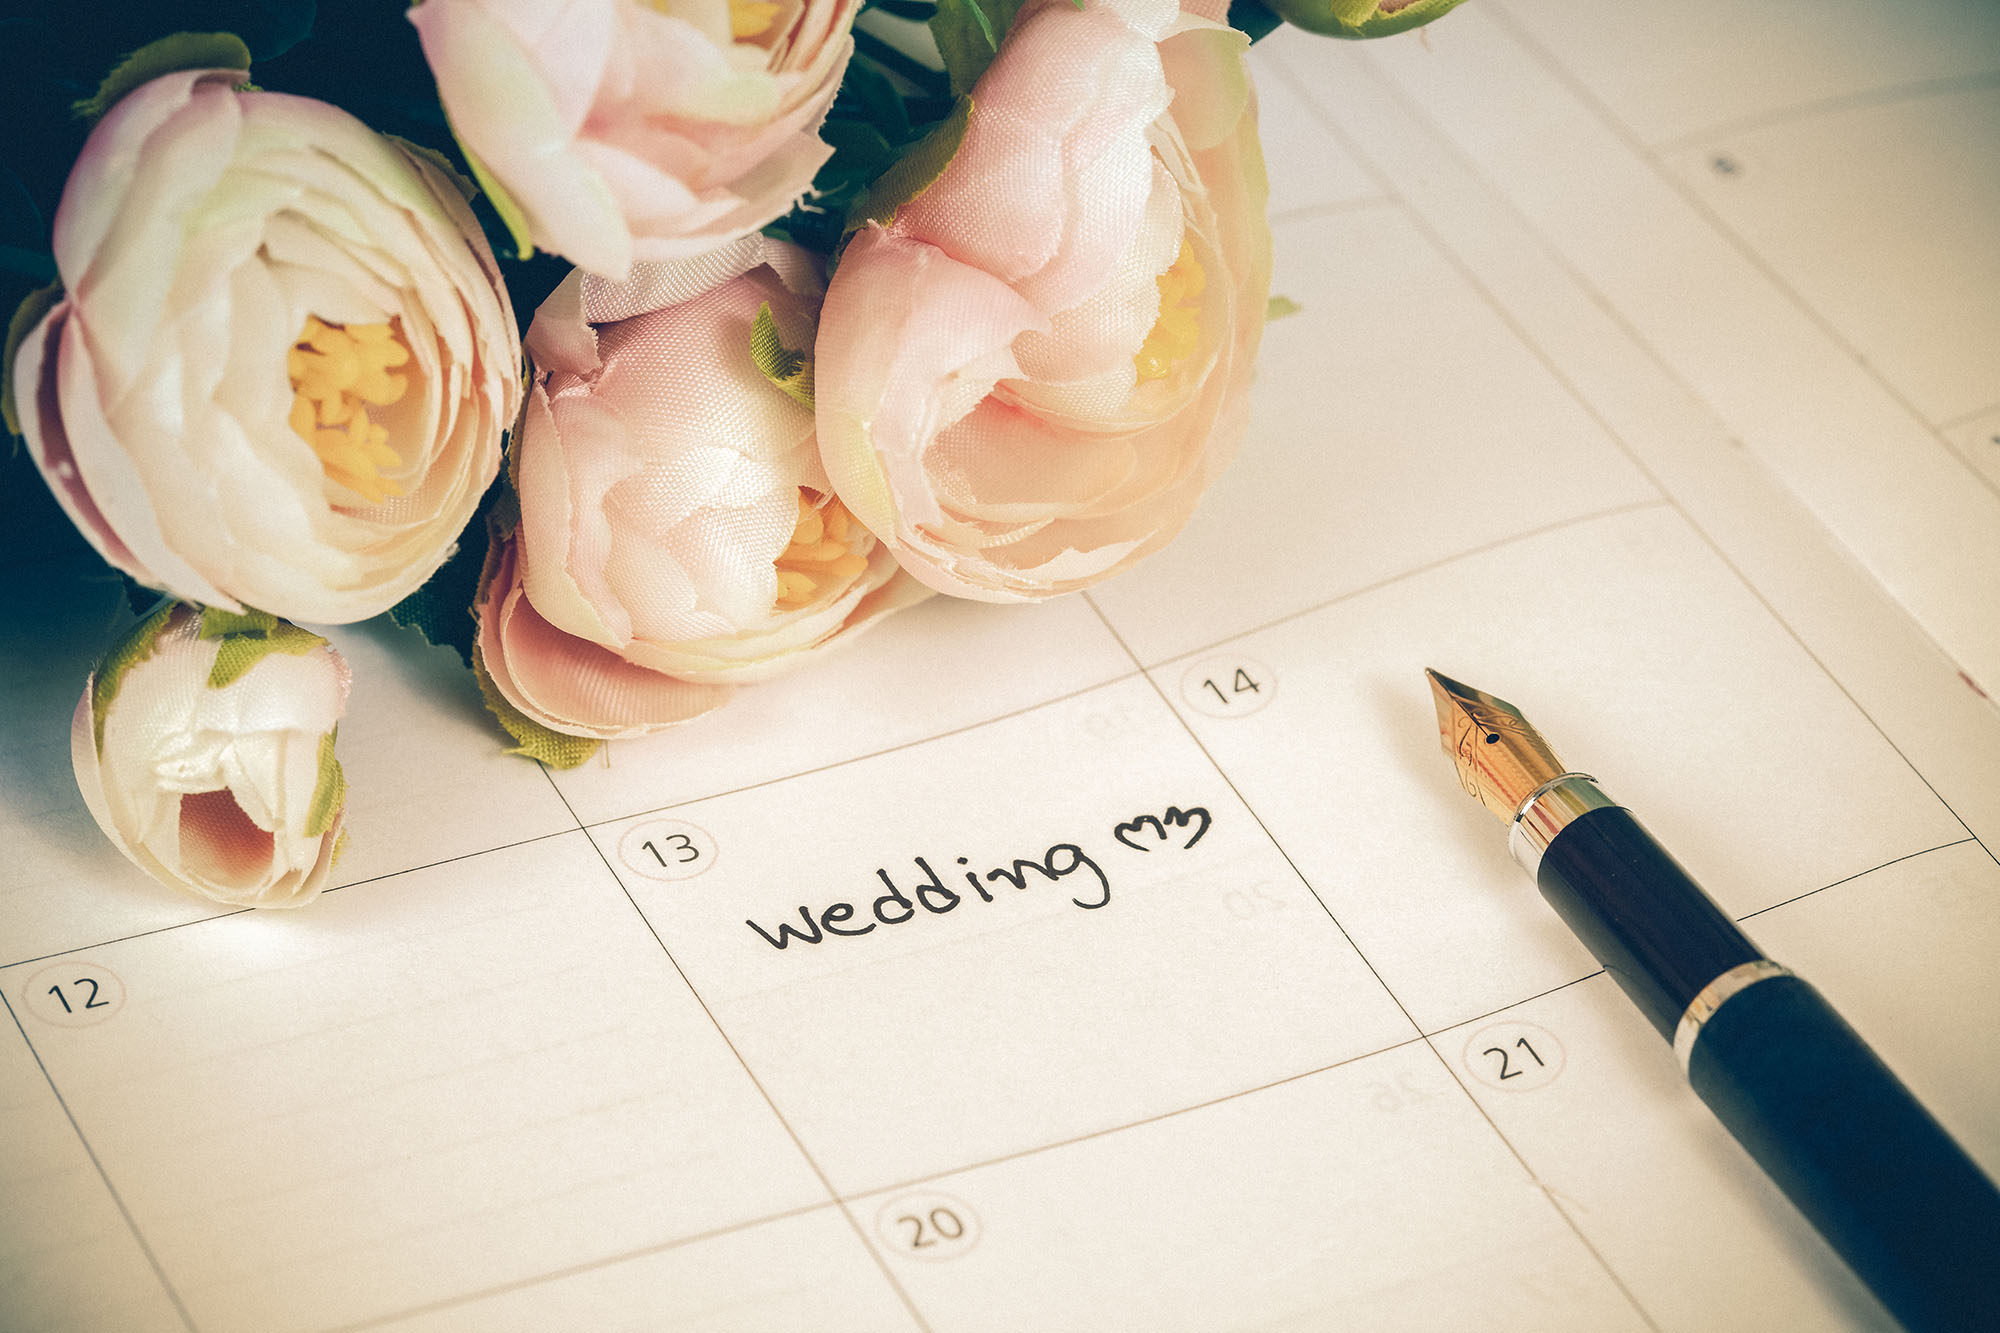 When Should I Start Thinking About Hiring a Wedding Planner? How Long Does a Wedding Planner Need?